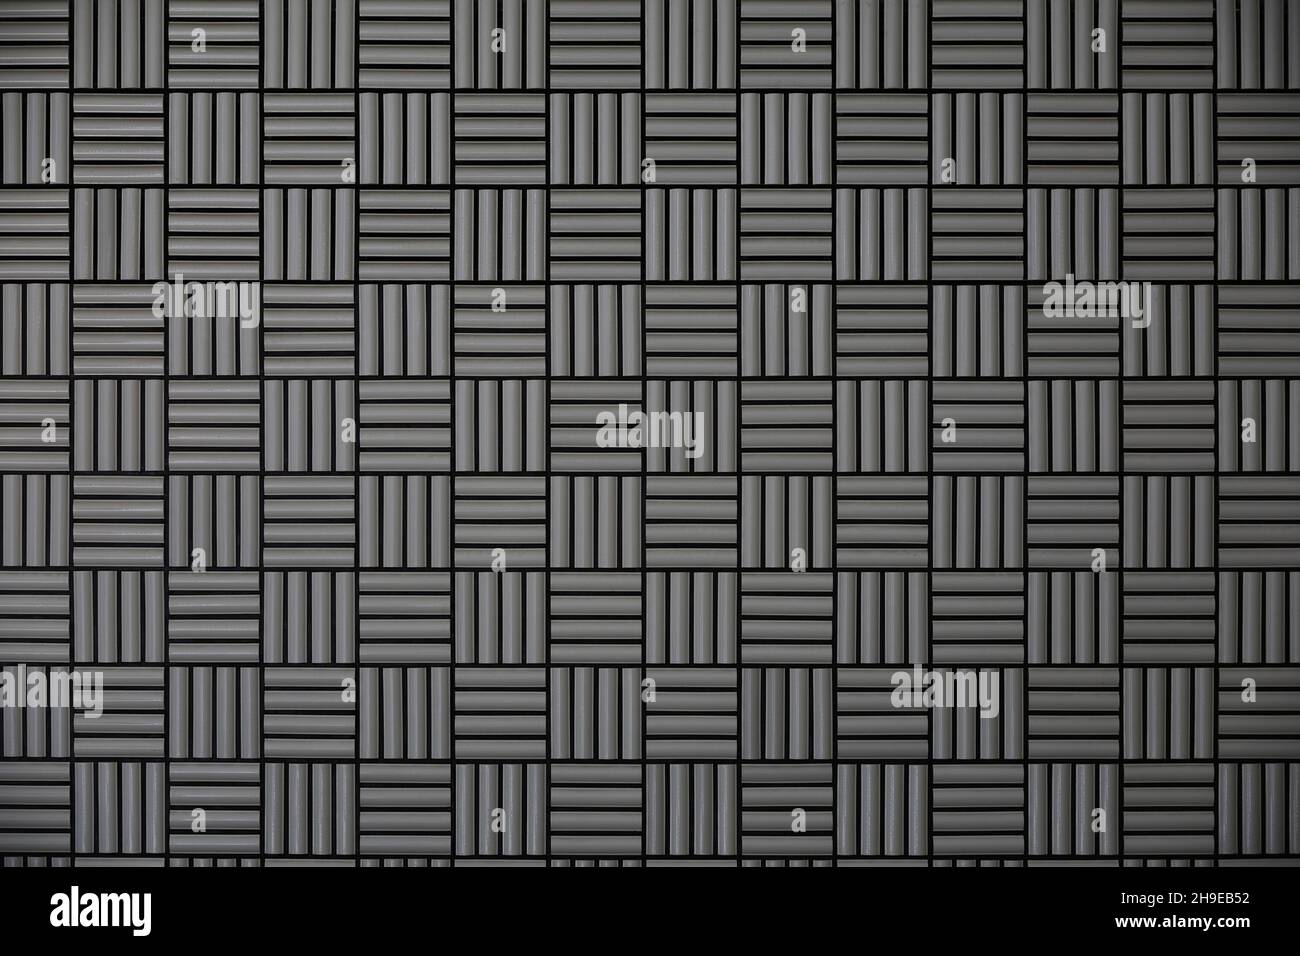 Gray tile wall with geometric pattern as background material Stock Photo